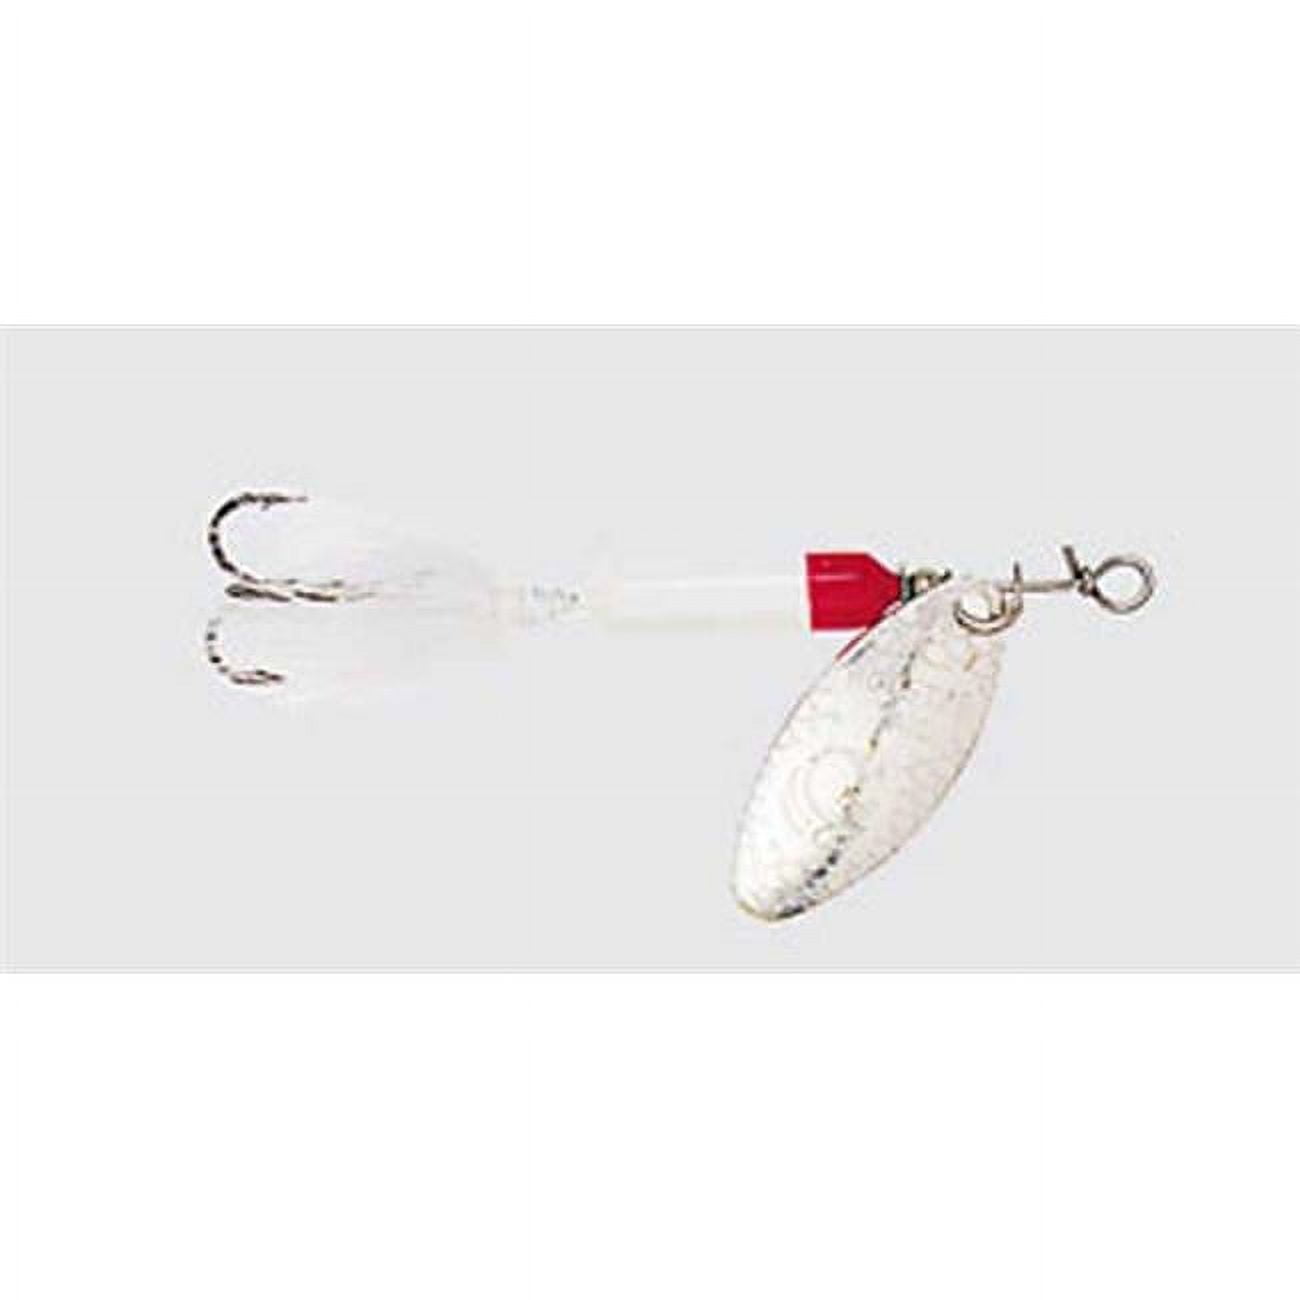 Yakima Bait Worden's Original Rooster Tail, Inline Spinnerbait Fishing  Lure, White & Red, 1/4 oz